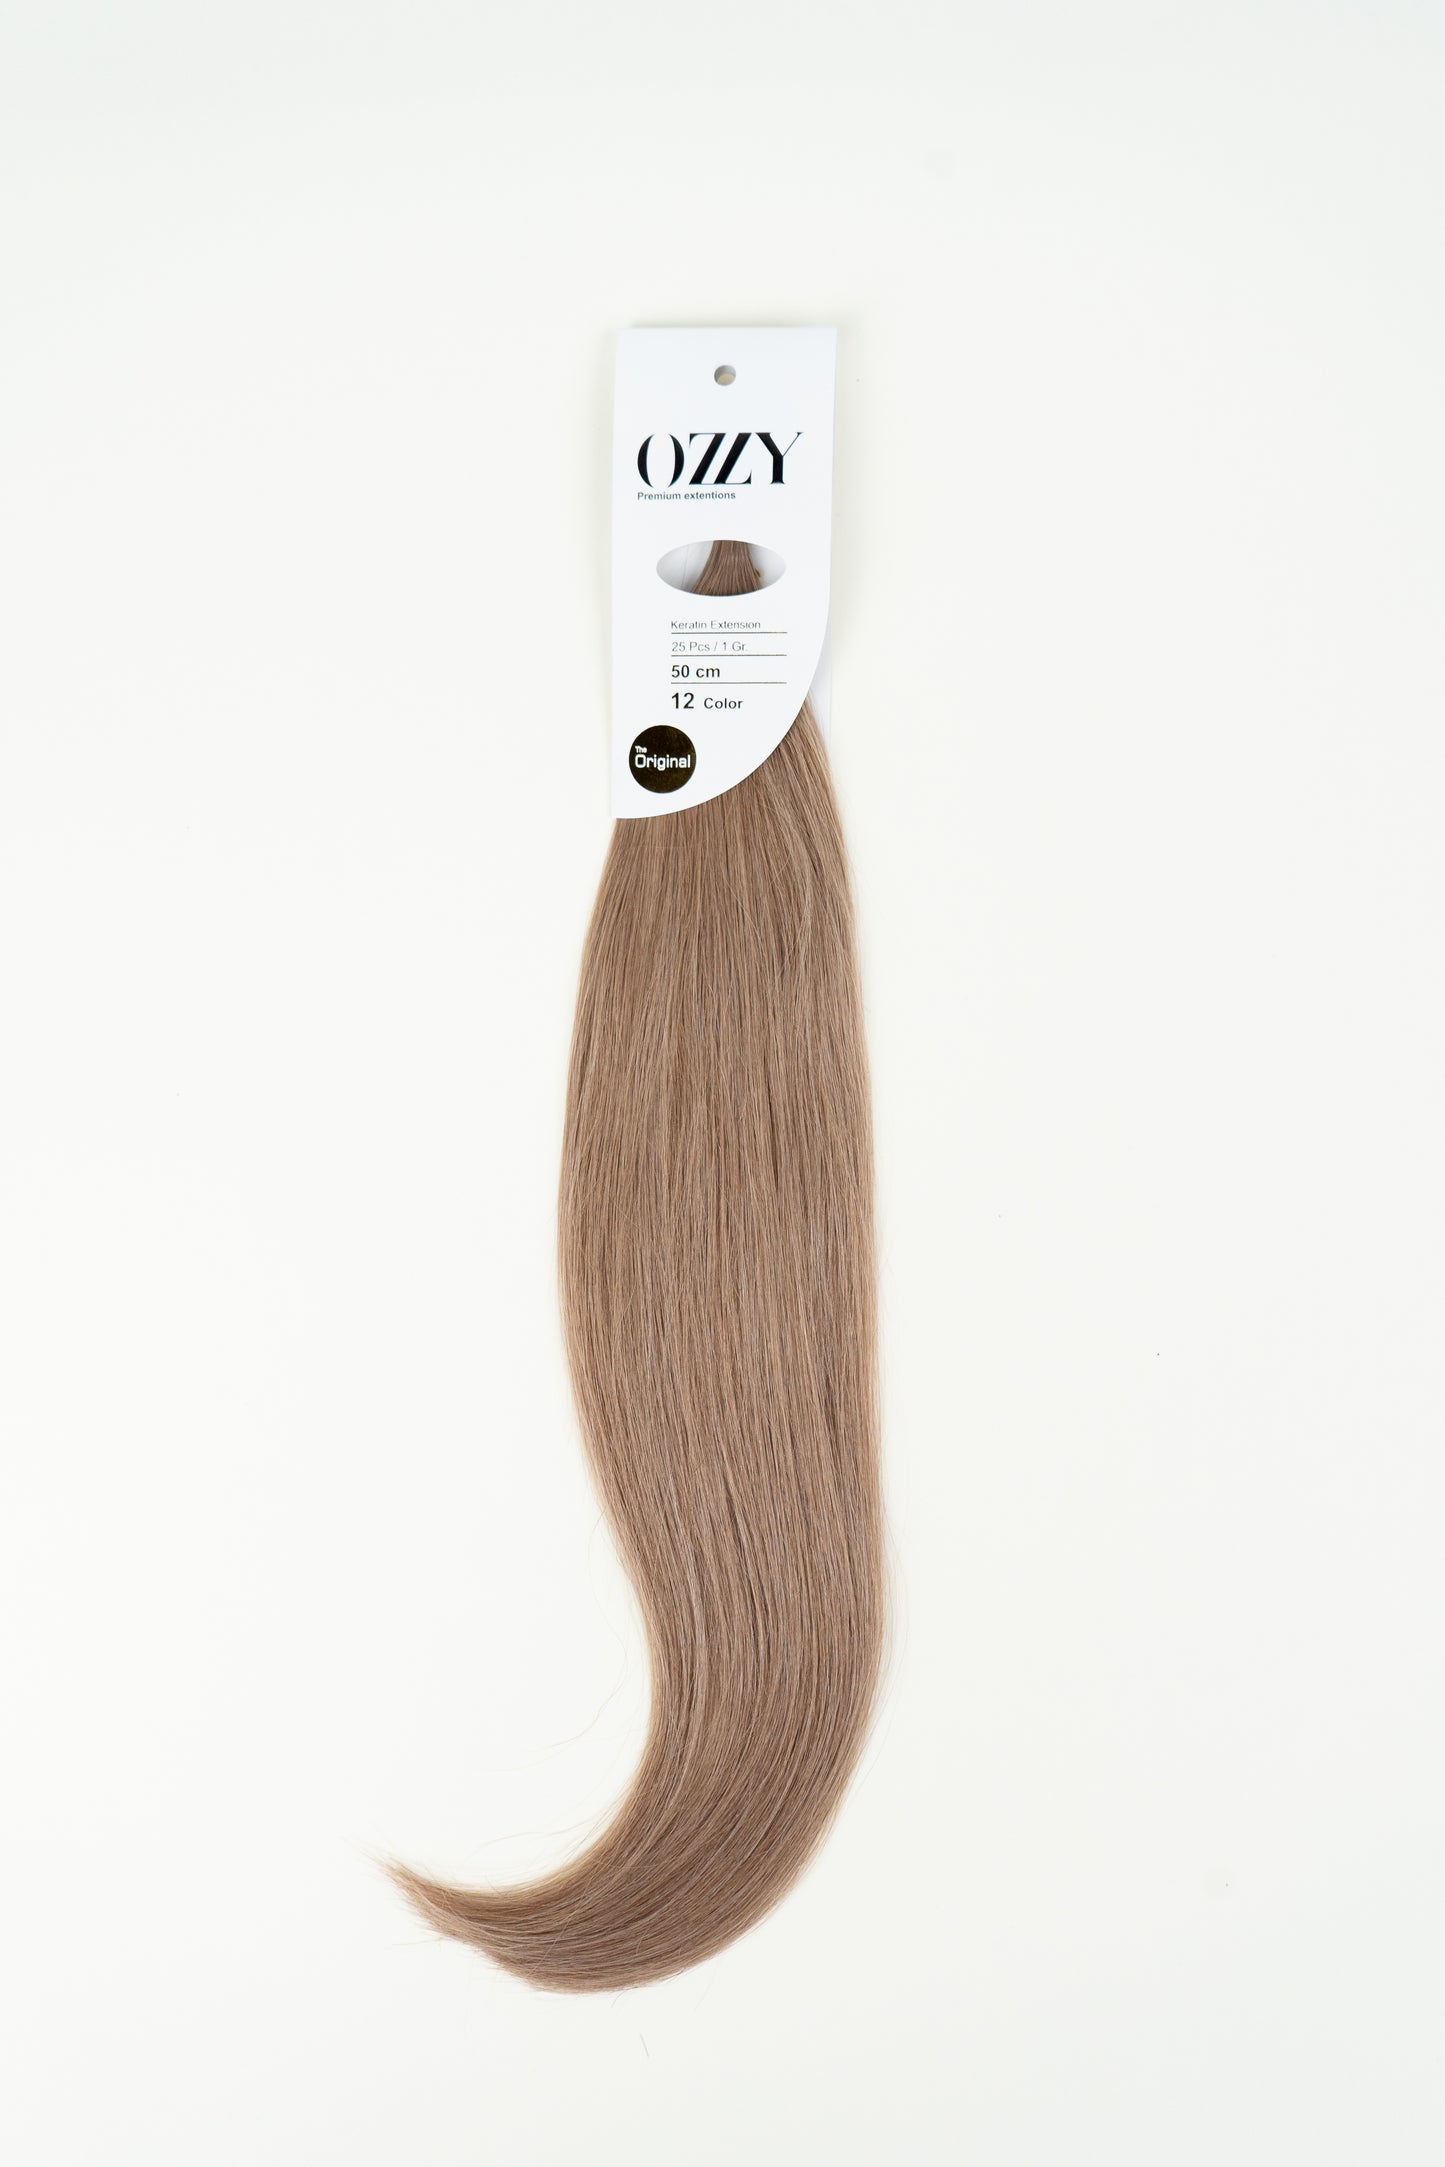 Keratin Extension #12 by Ozzy